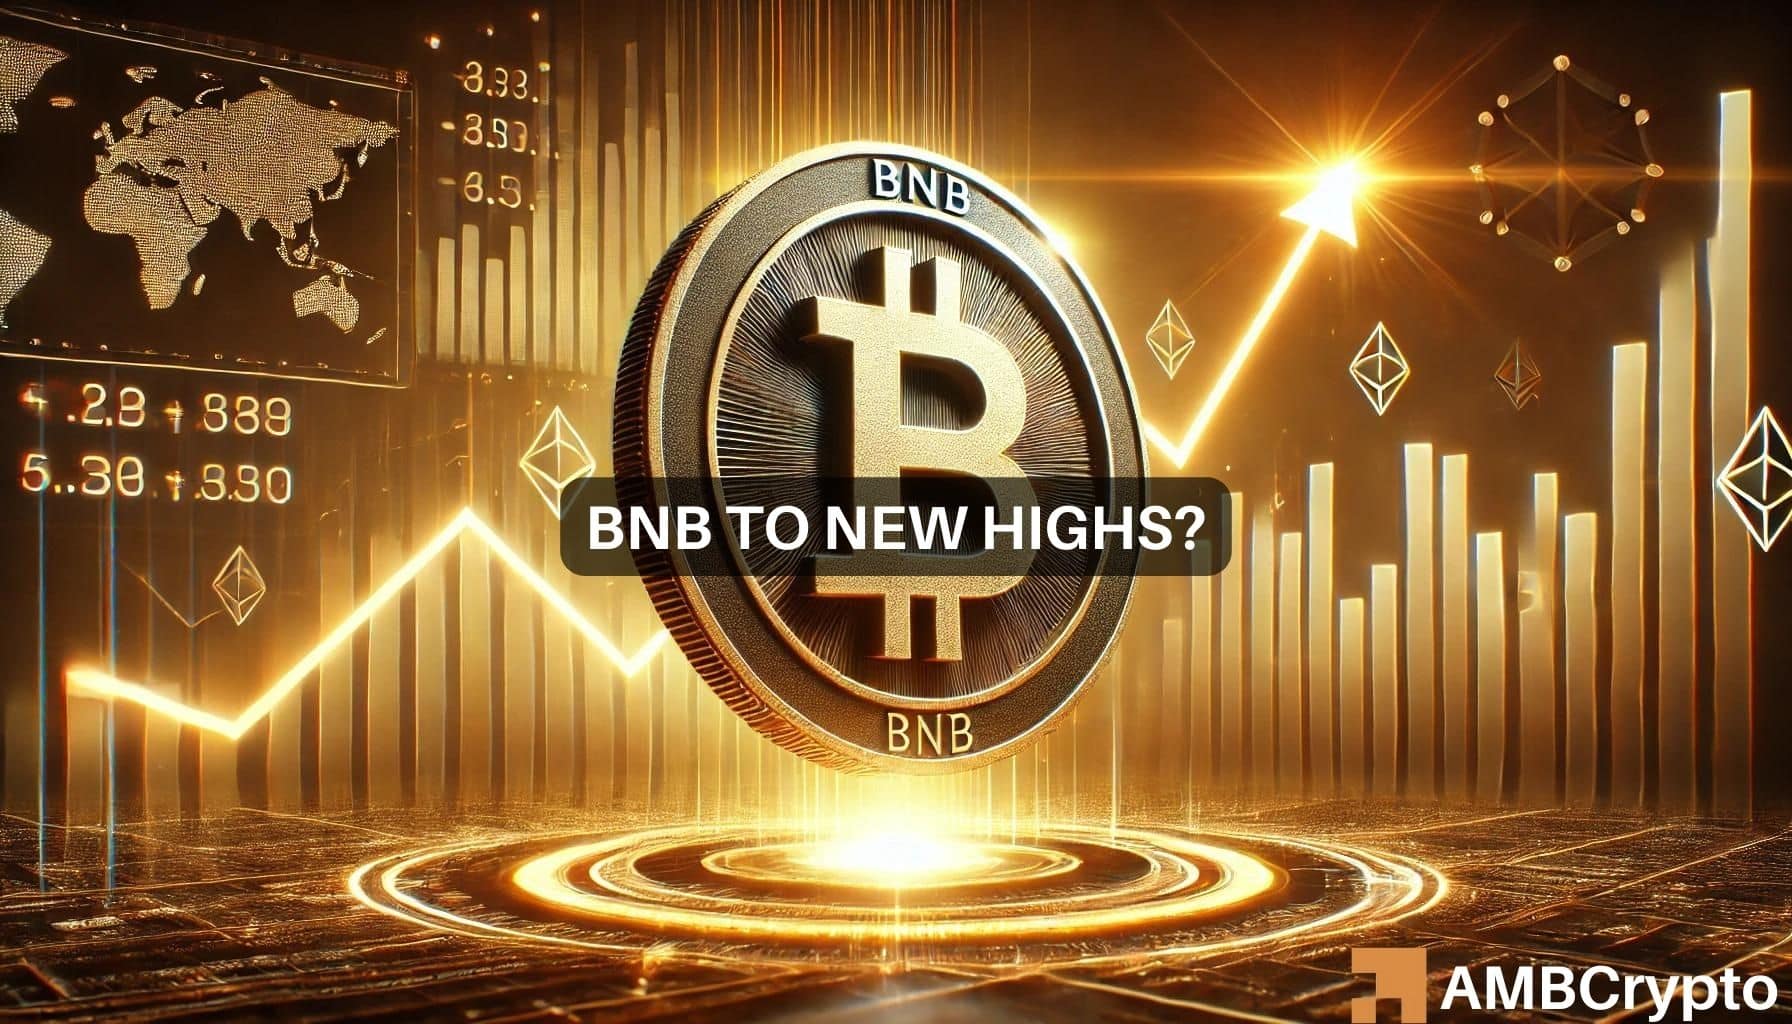 BNB’s 29% surge: Impact of new opBNB layer 2 testnet?